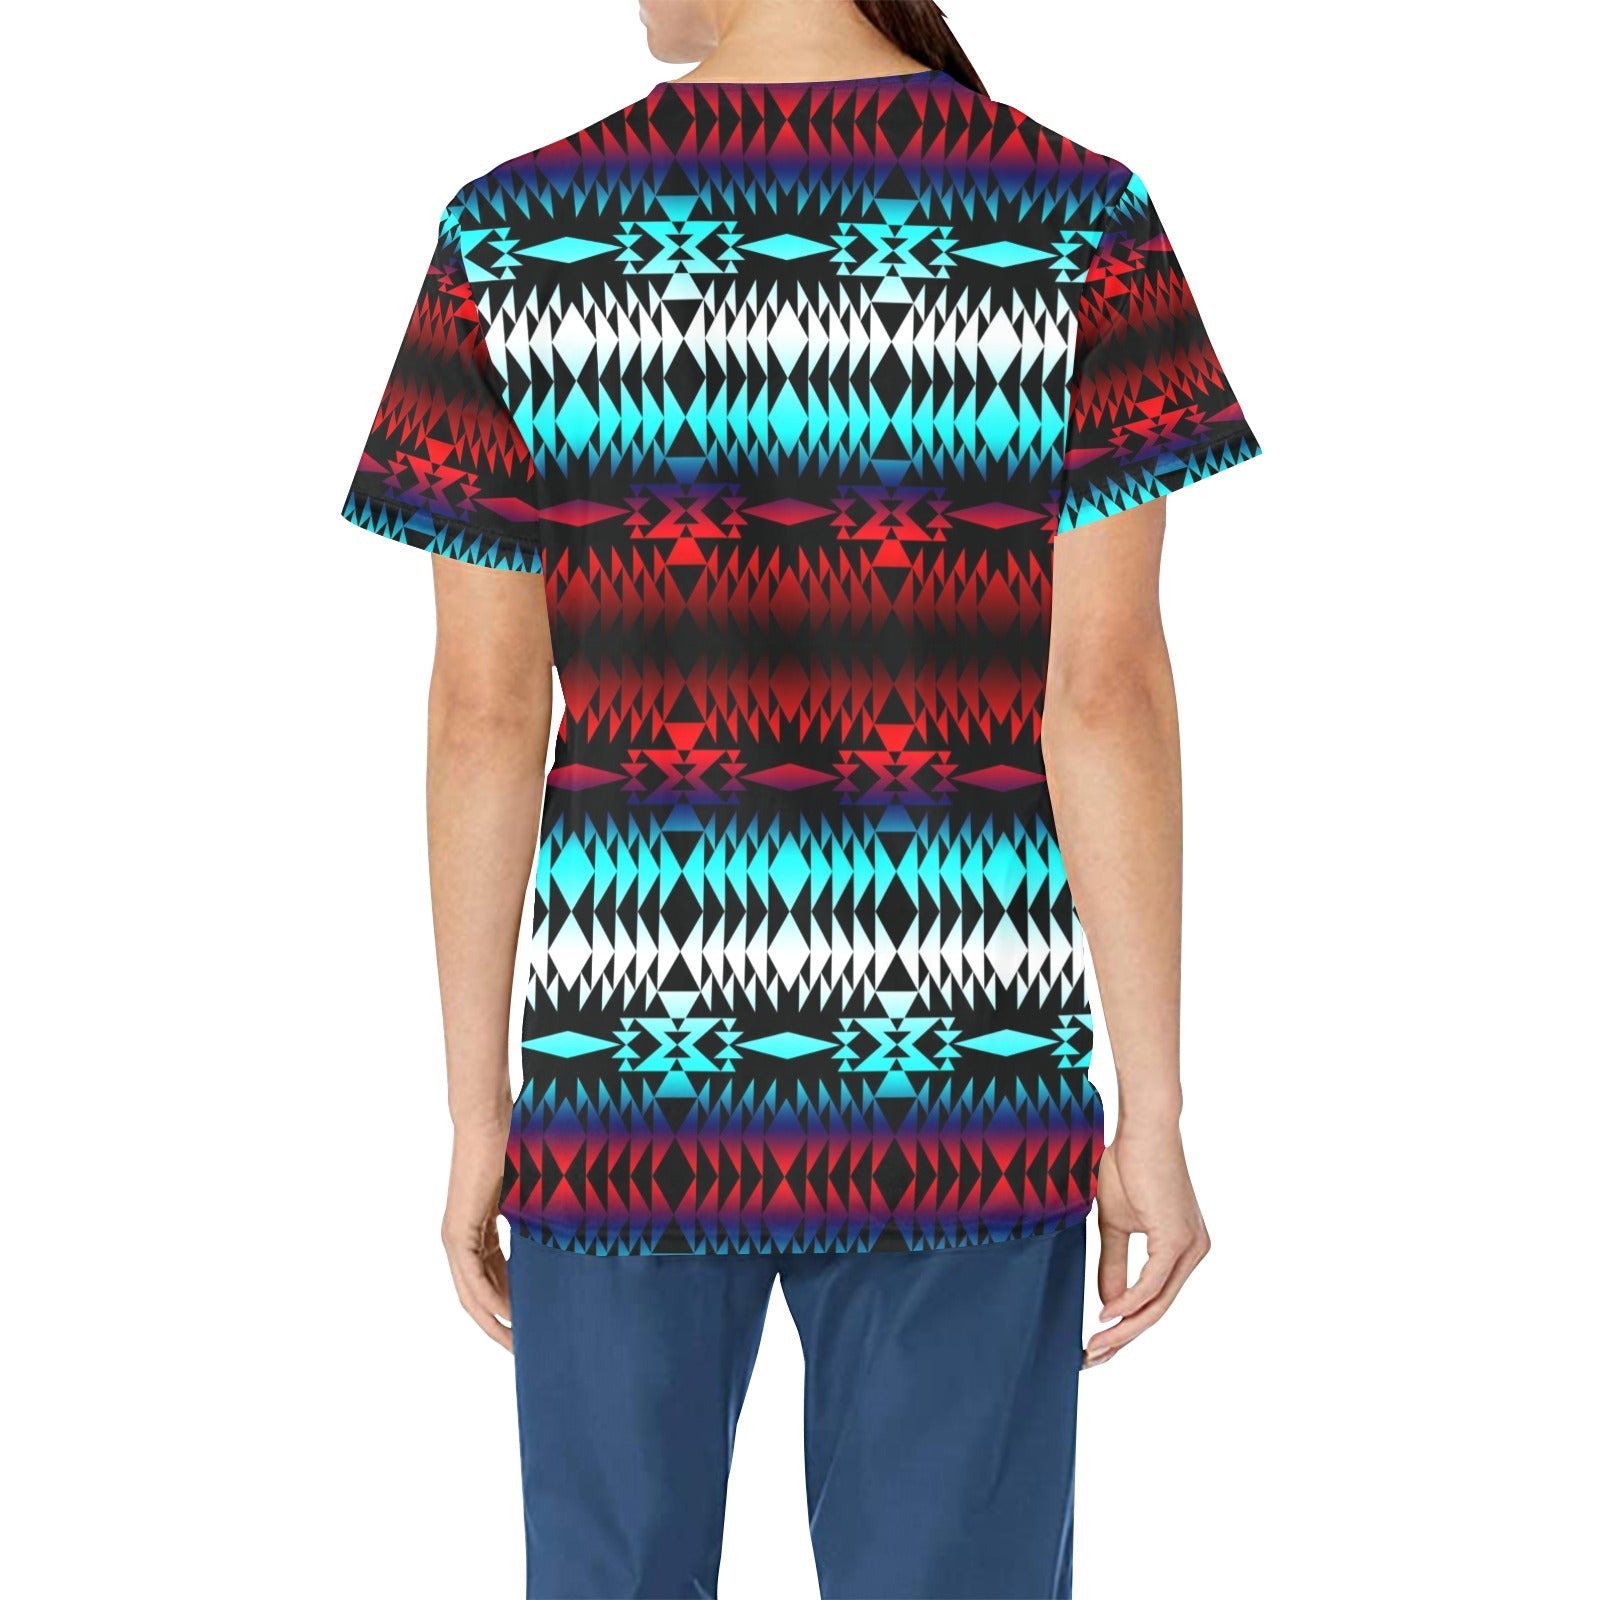 In Between Two Worlds All Over Print Scrub Top Scrub Top e-joyer 